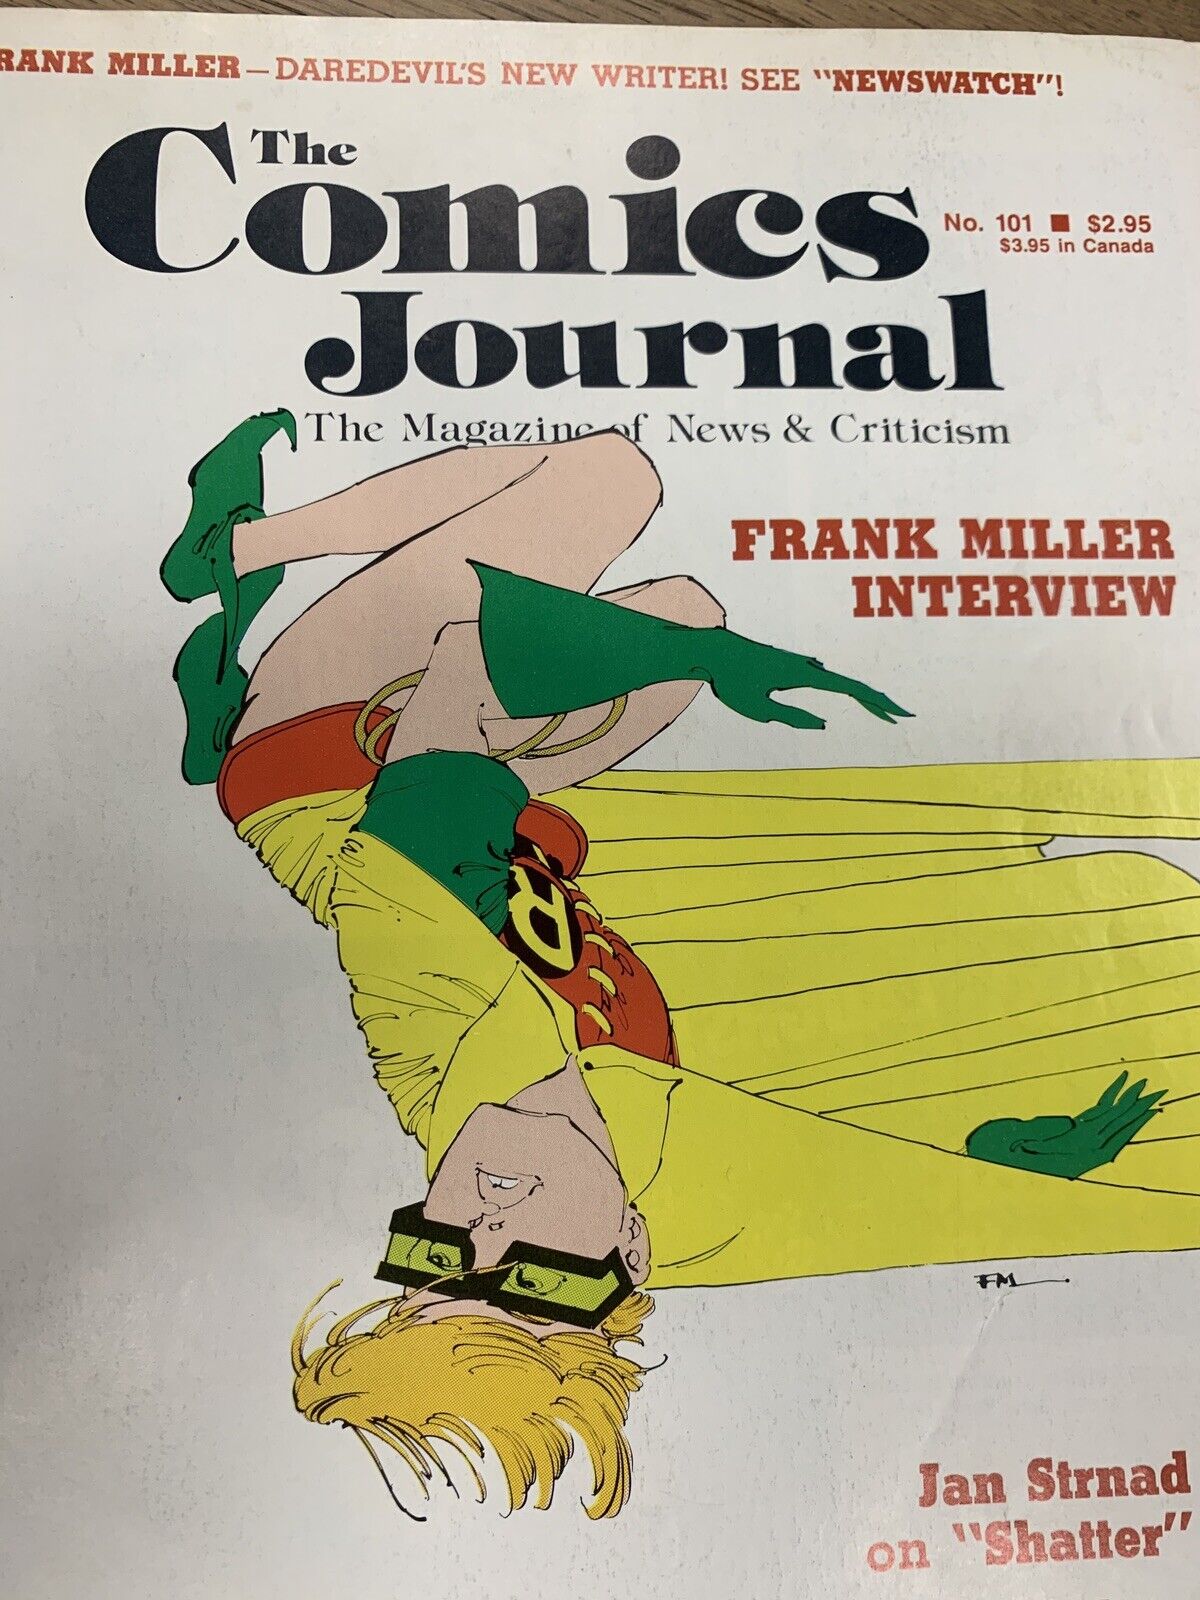 Comics Journal #101 1985 Frank Miller interview  *SOLID, WELL-LOVED, COPY*